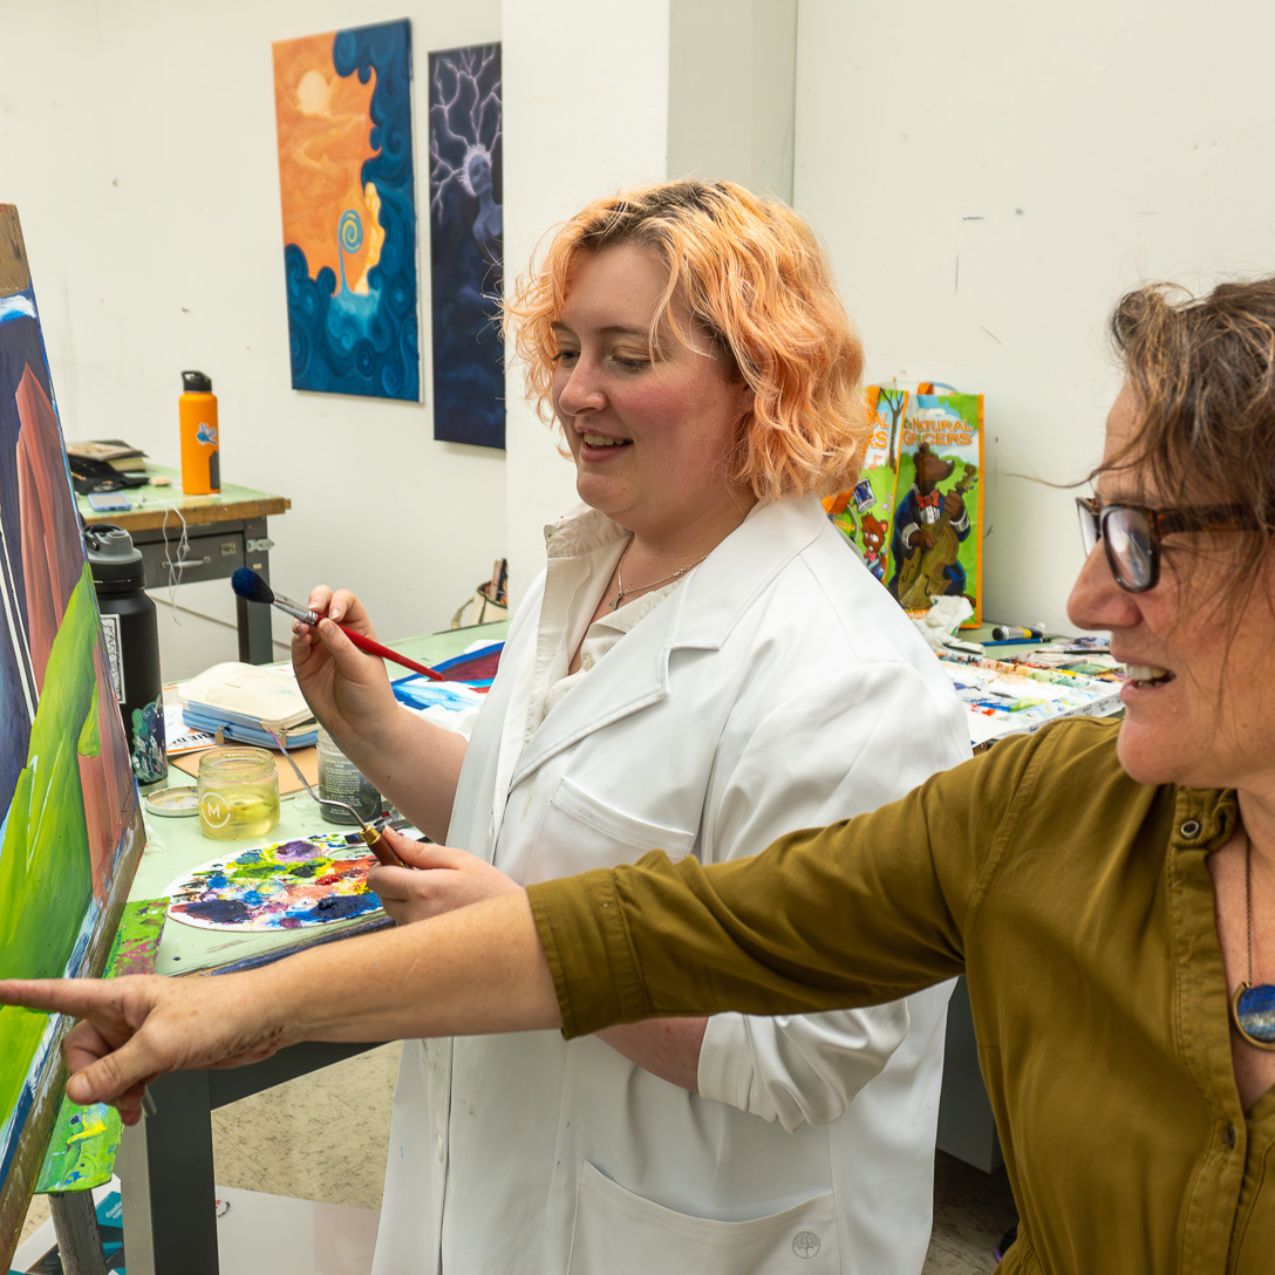 A student holds a paintbrush at a canvas on an easel while a professor points to something on the canvas